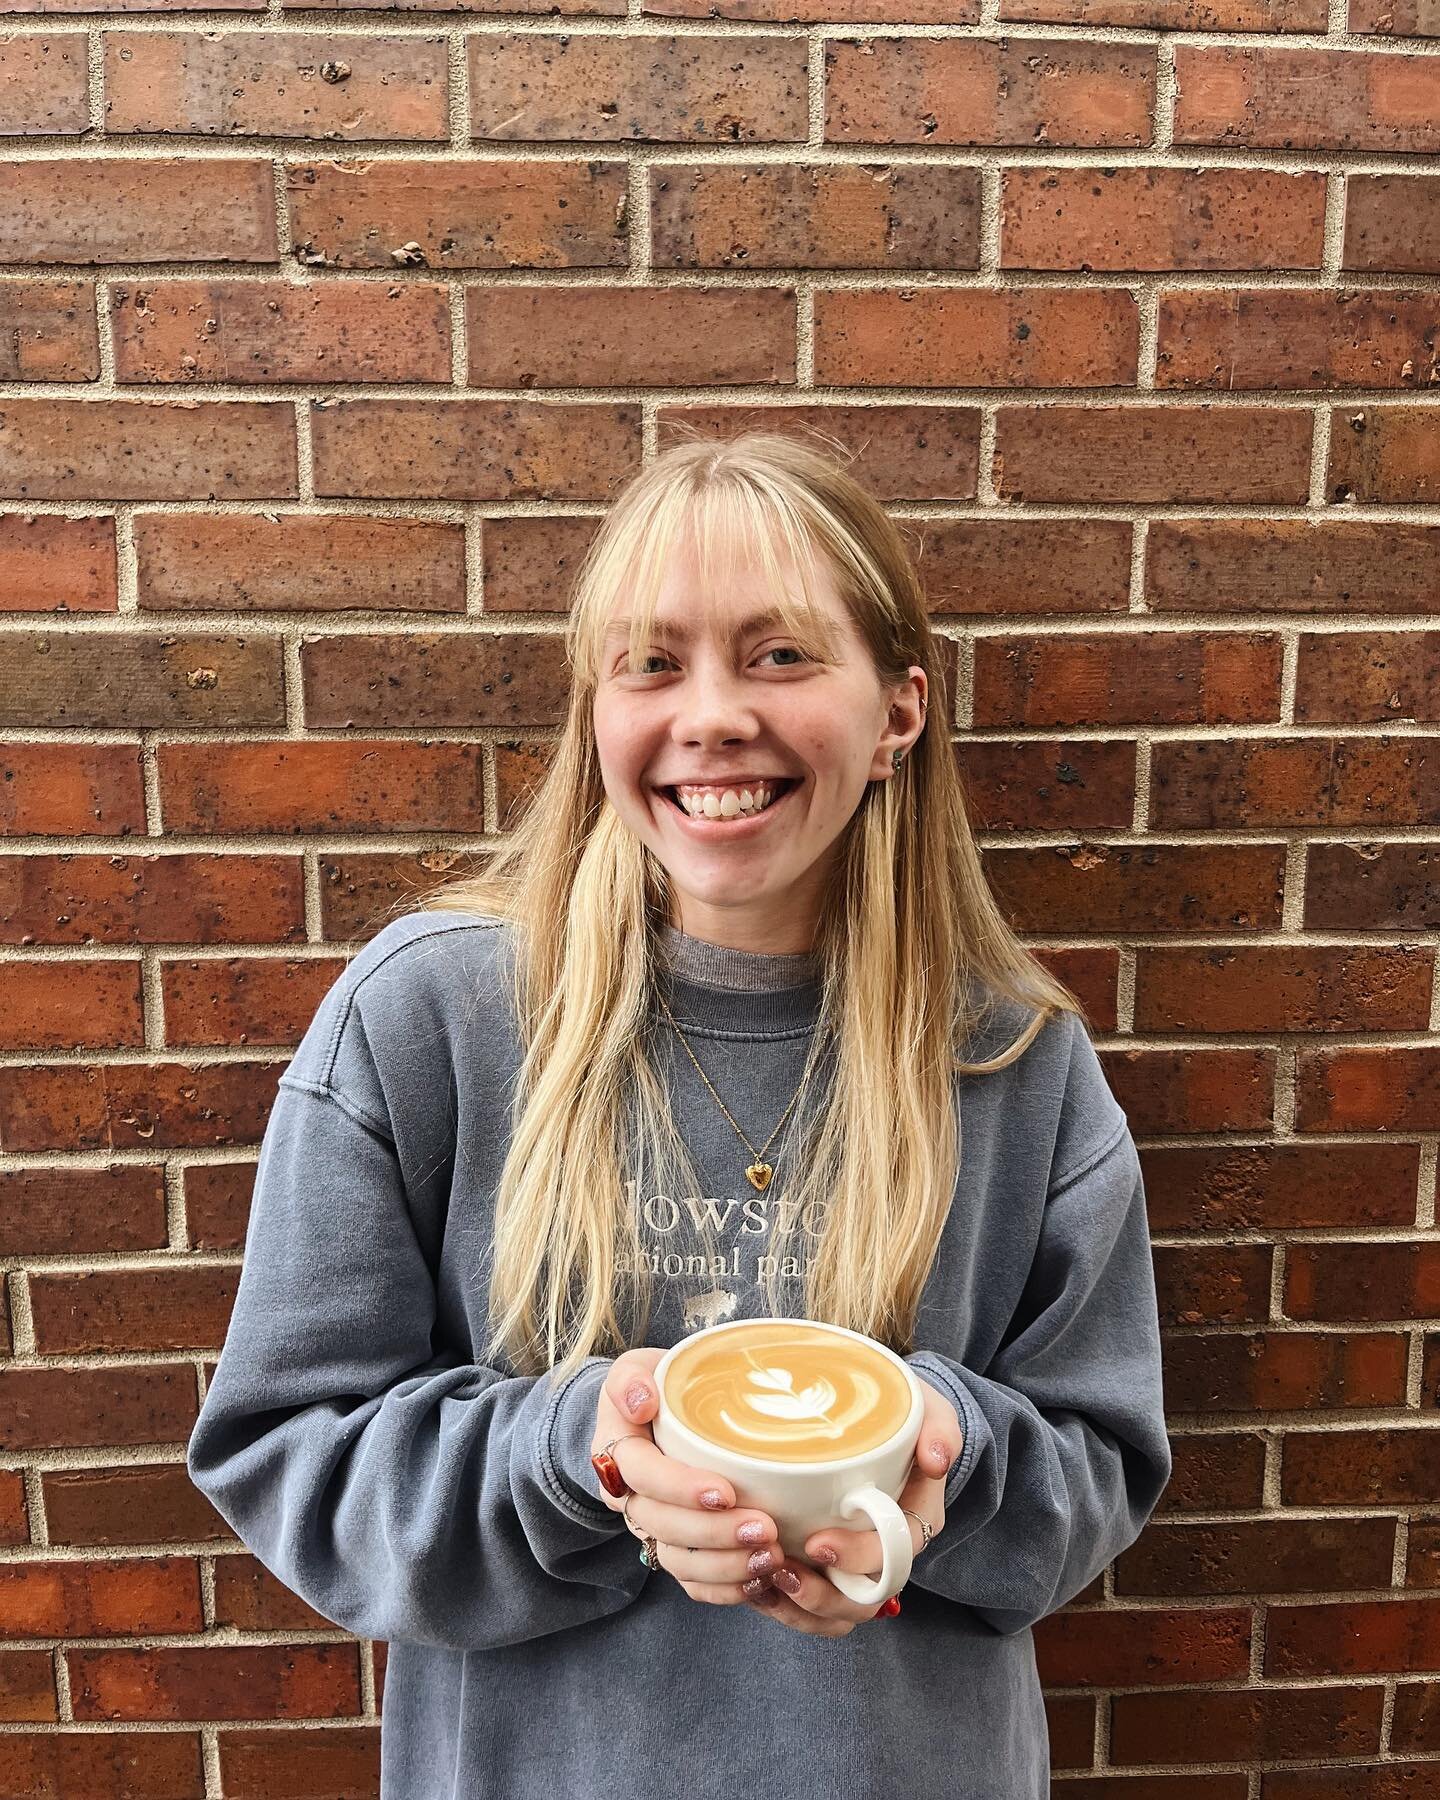 Meet the Blue Crew☕️- IRIS 

Iris started working at the Bistro in November of 2021! Her favorite coffee drink is a honey vanilla latte with oat milk. Her favorite food menu item is our falafel tacos. She loves traveling, taking photos, and dancing! 